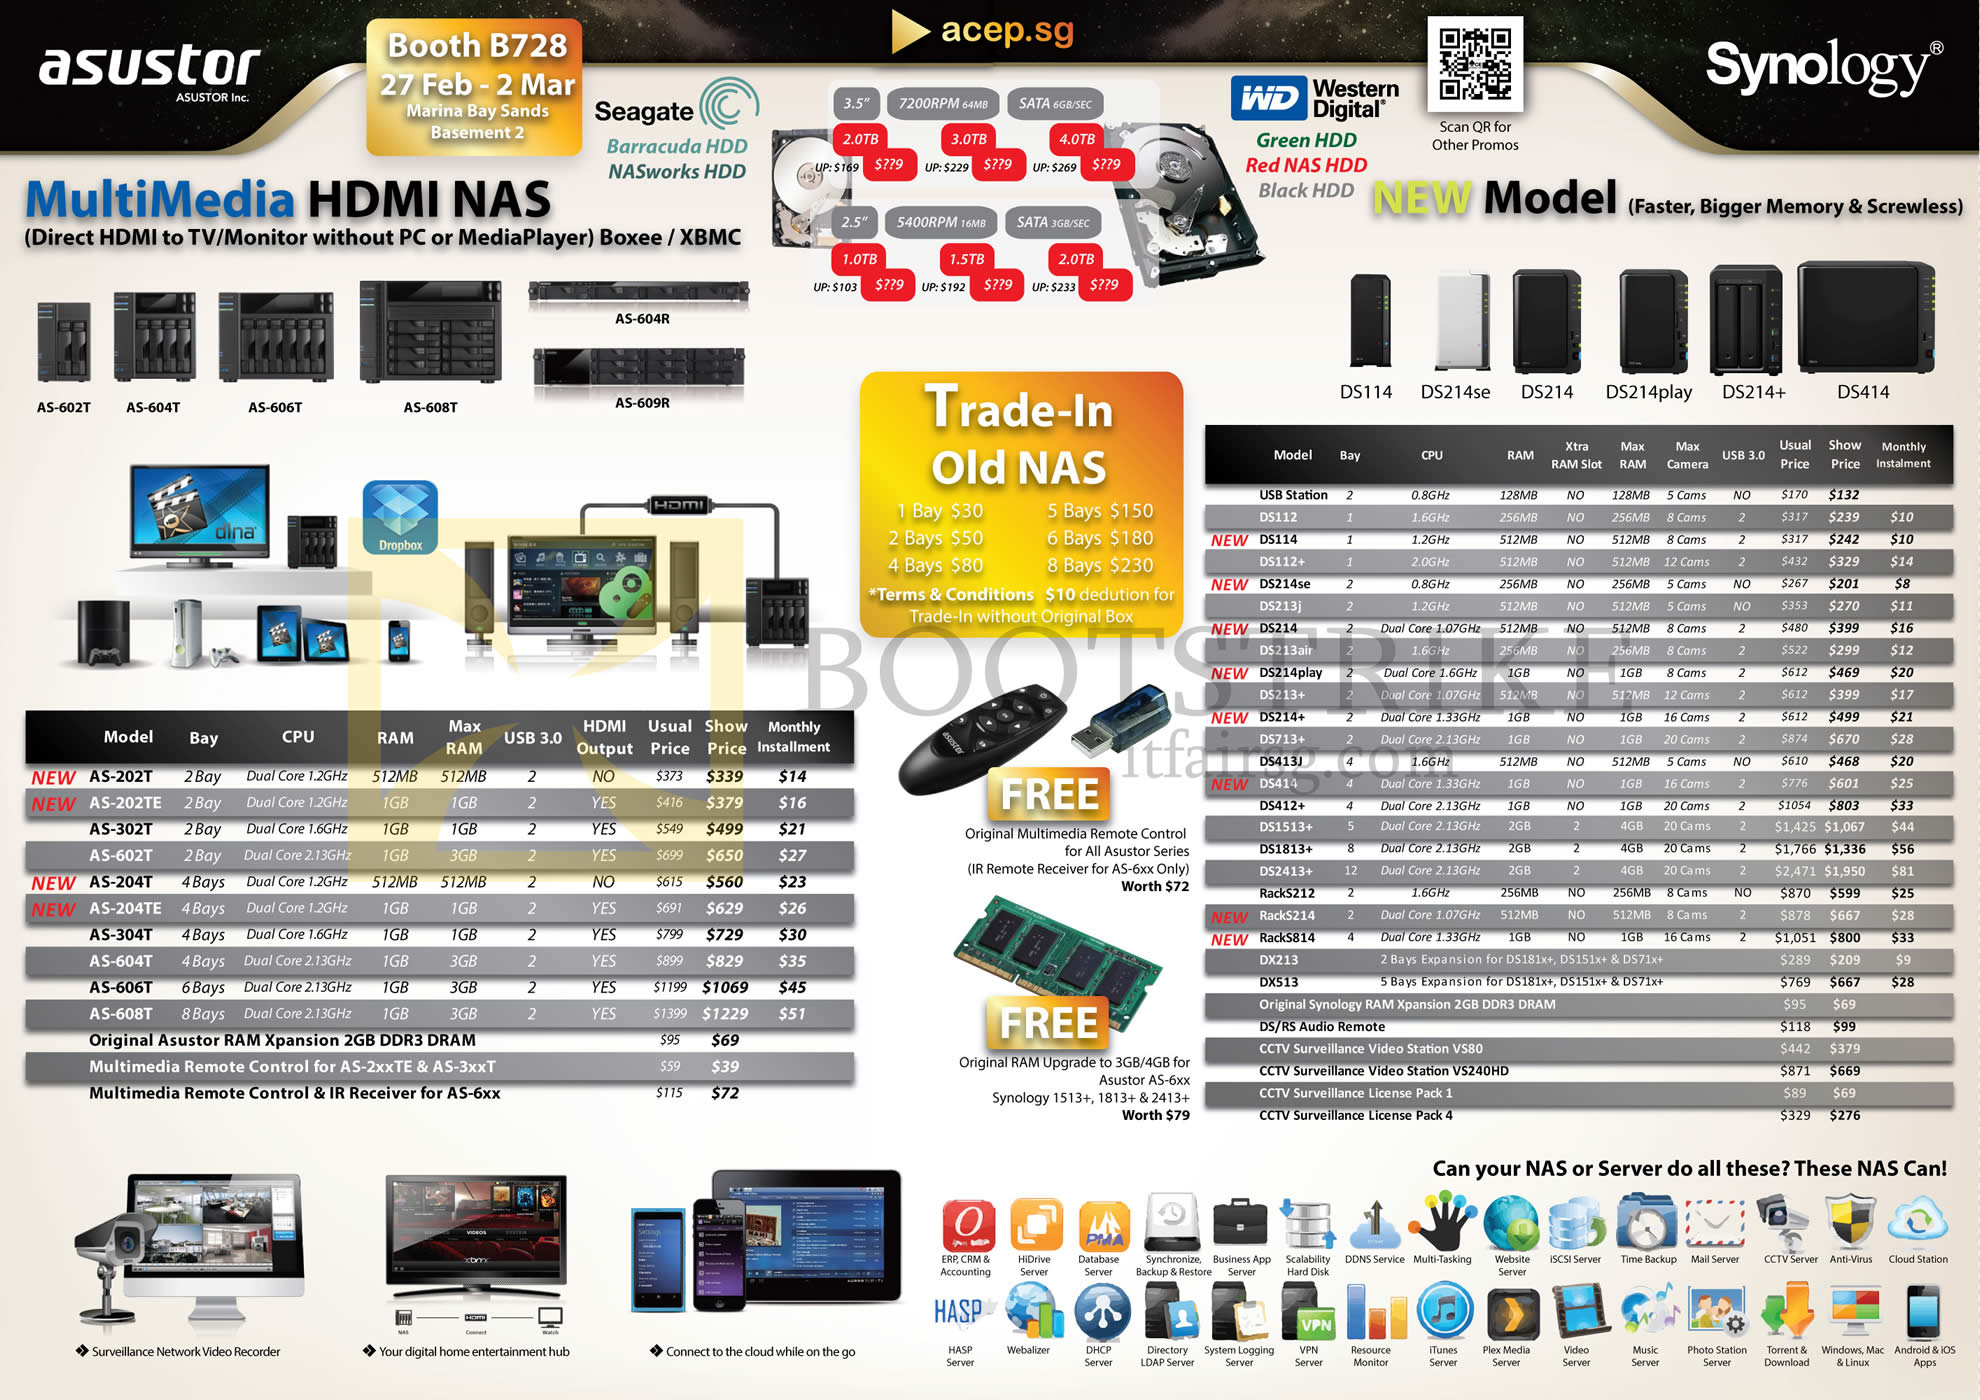 IT SHOW 2014 price list image brochure of Ace Peripherals NAS Asustor ACTi HiTi Synology Seagate Western Digital WD, DiskStation